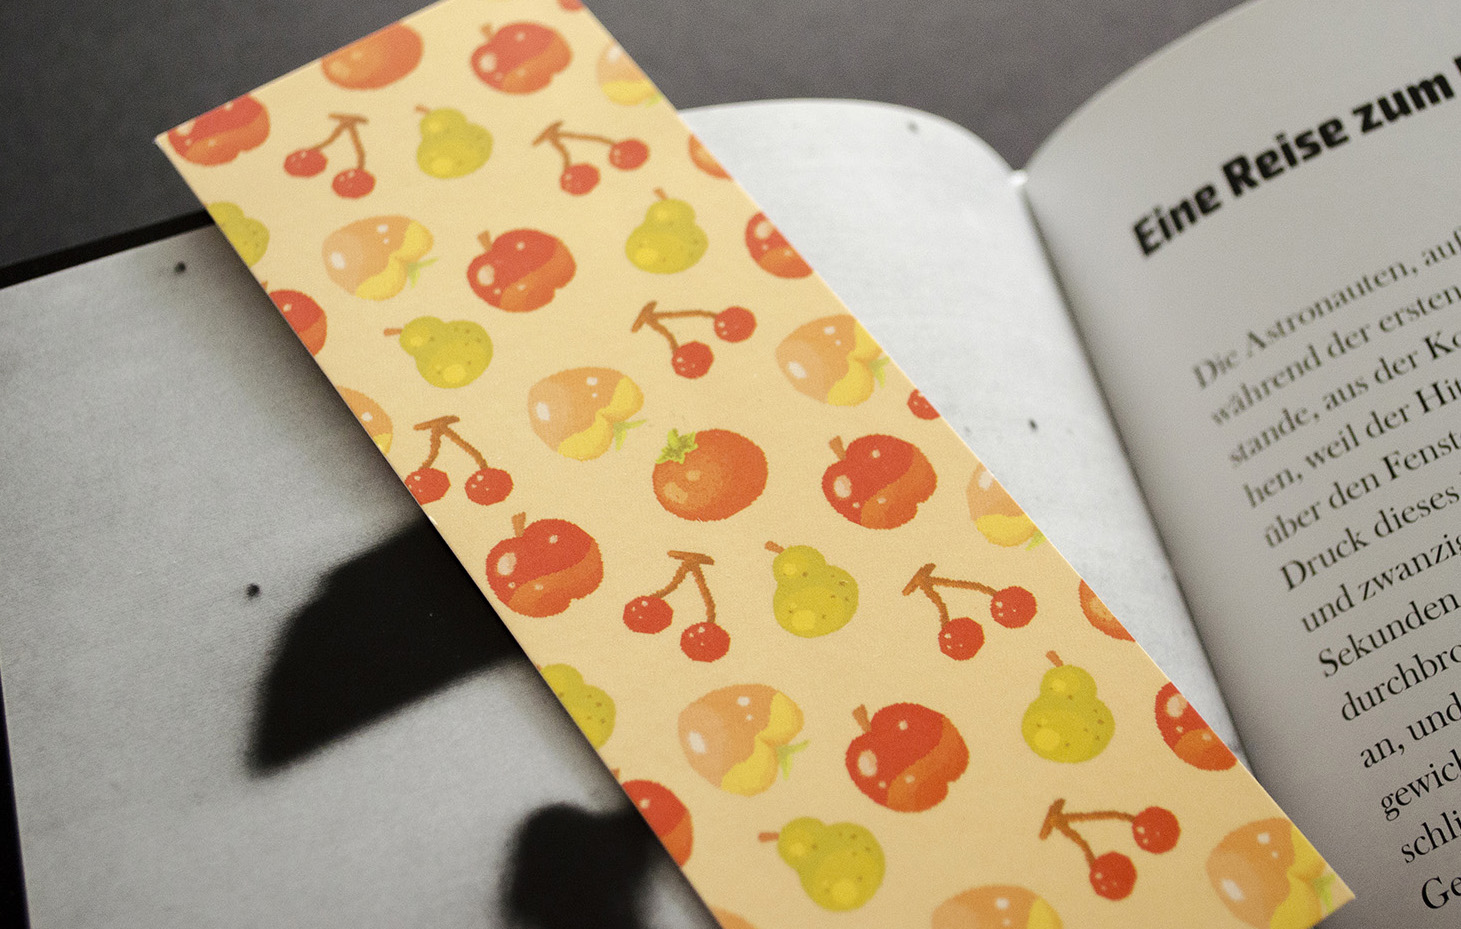 Bookmark with fruit pattern